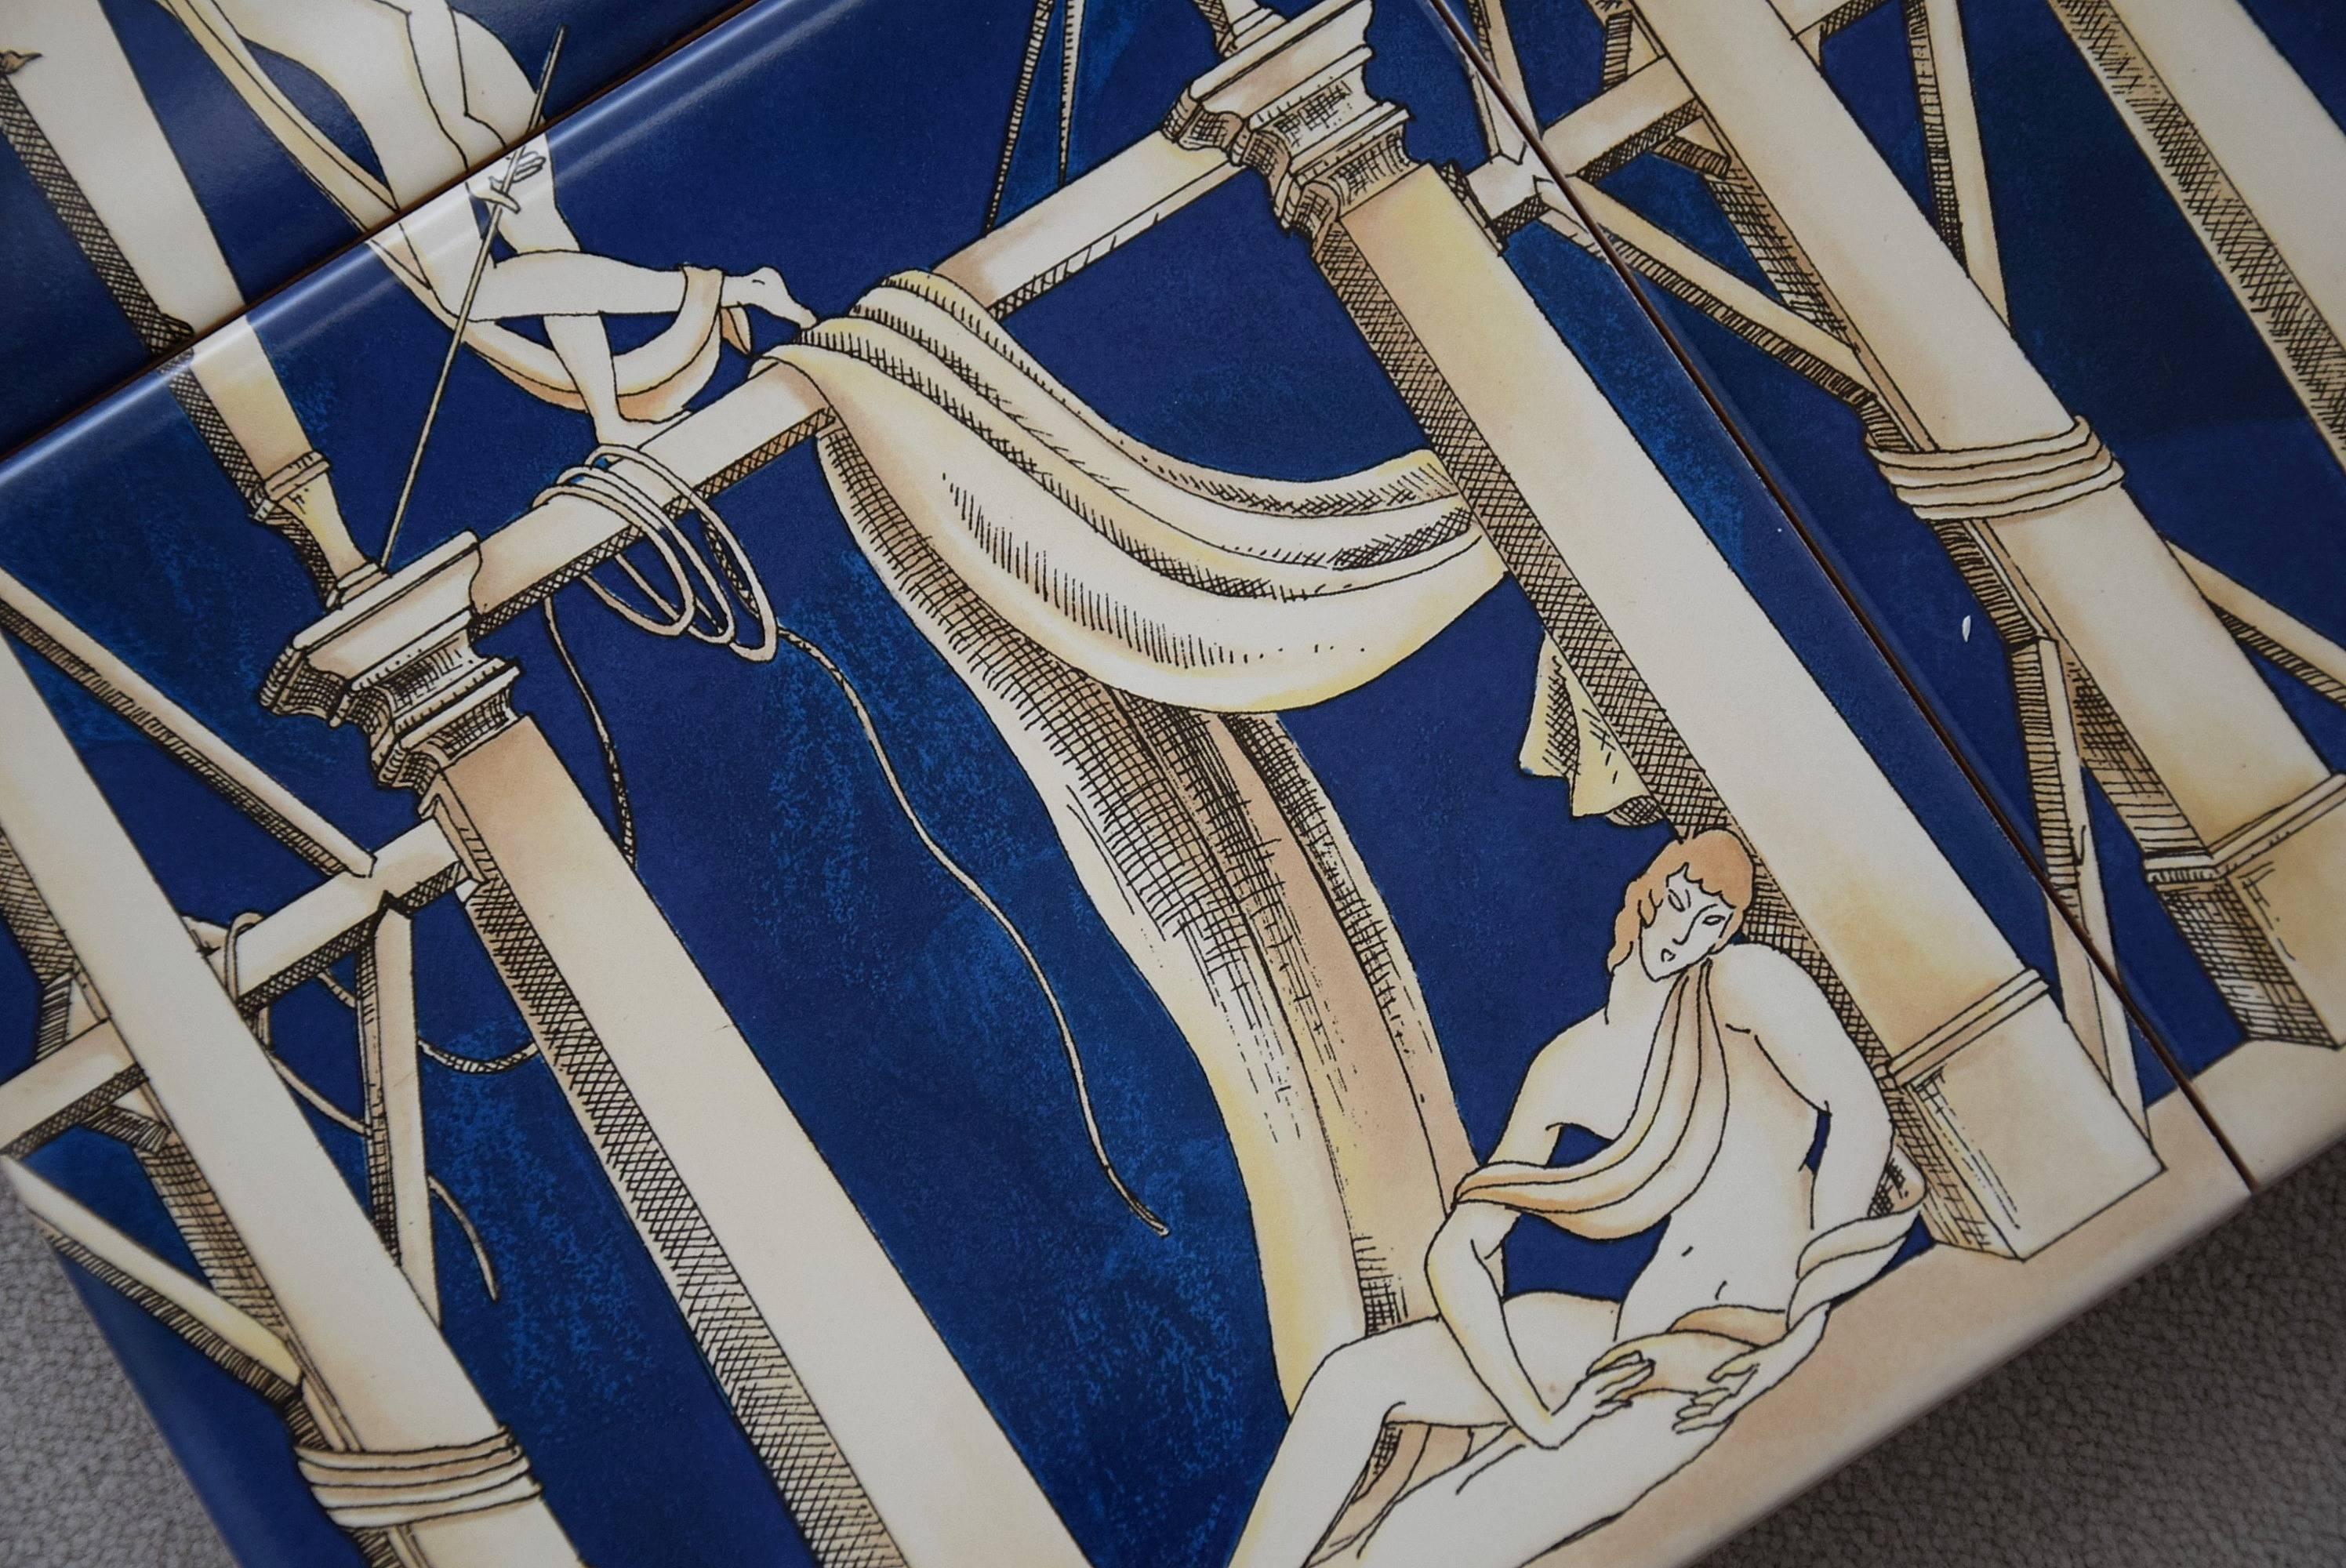 Gio Ponti ceramic tiles La Casa Degli Efebi.
New Old Stock beautiful set of ceramic tiles with a famous design made by Gio Ponti in 1923 for ceramic producer Richard Ginori.

The tiles are in perfect condition and come with their original box.

Each